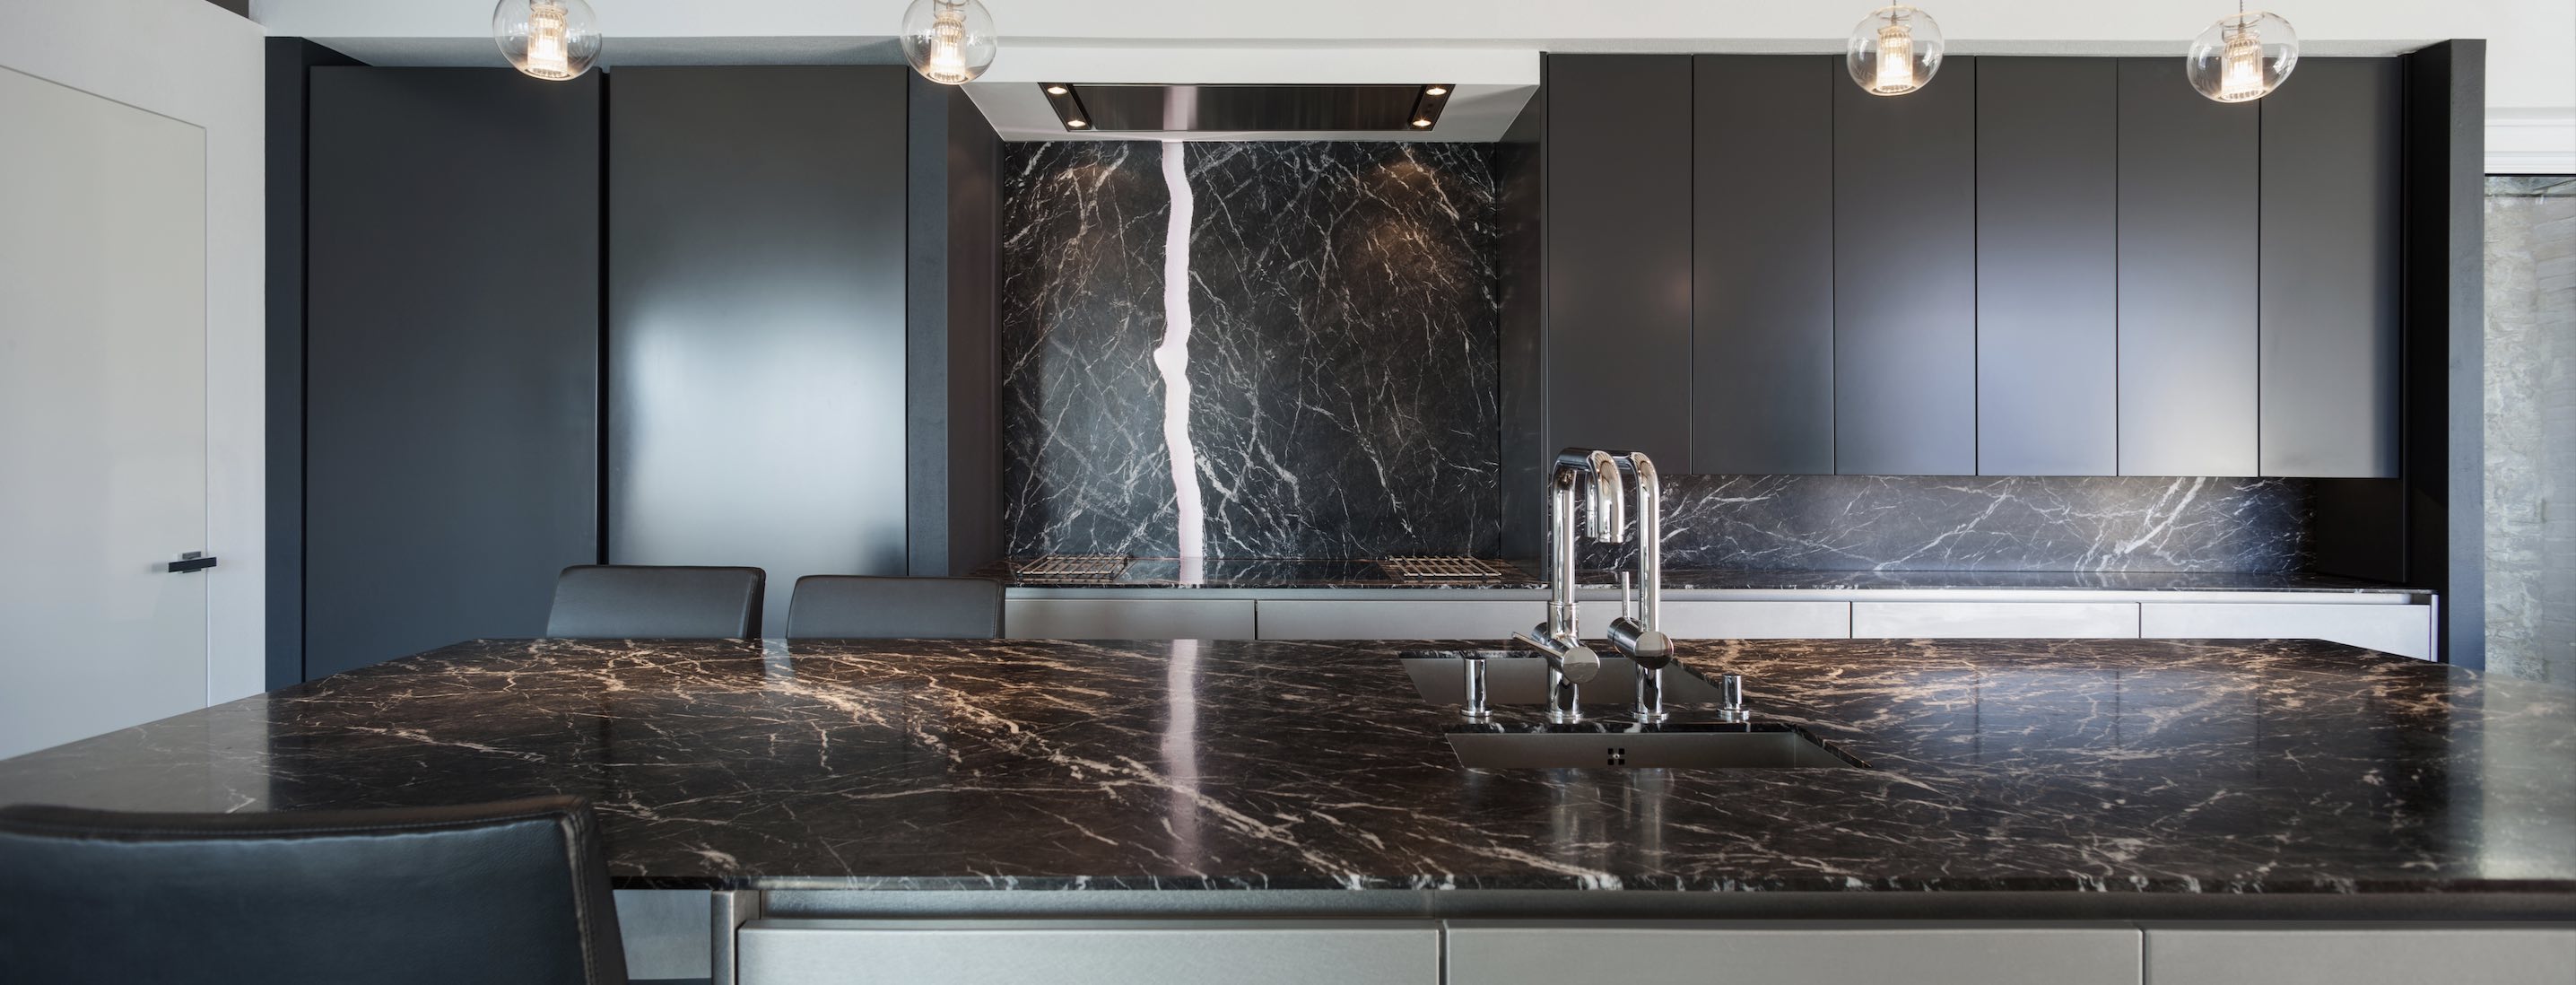 Fall Home Decor Trend: Marble